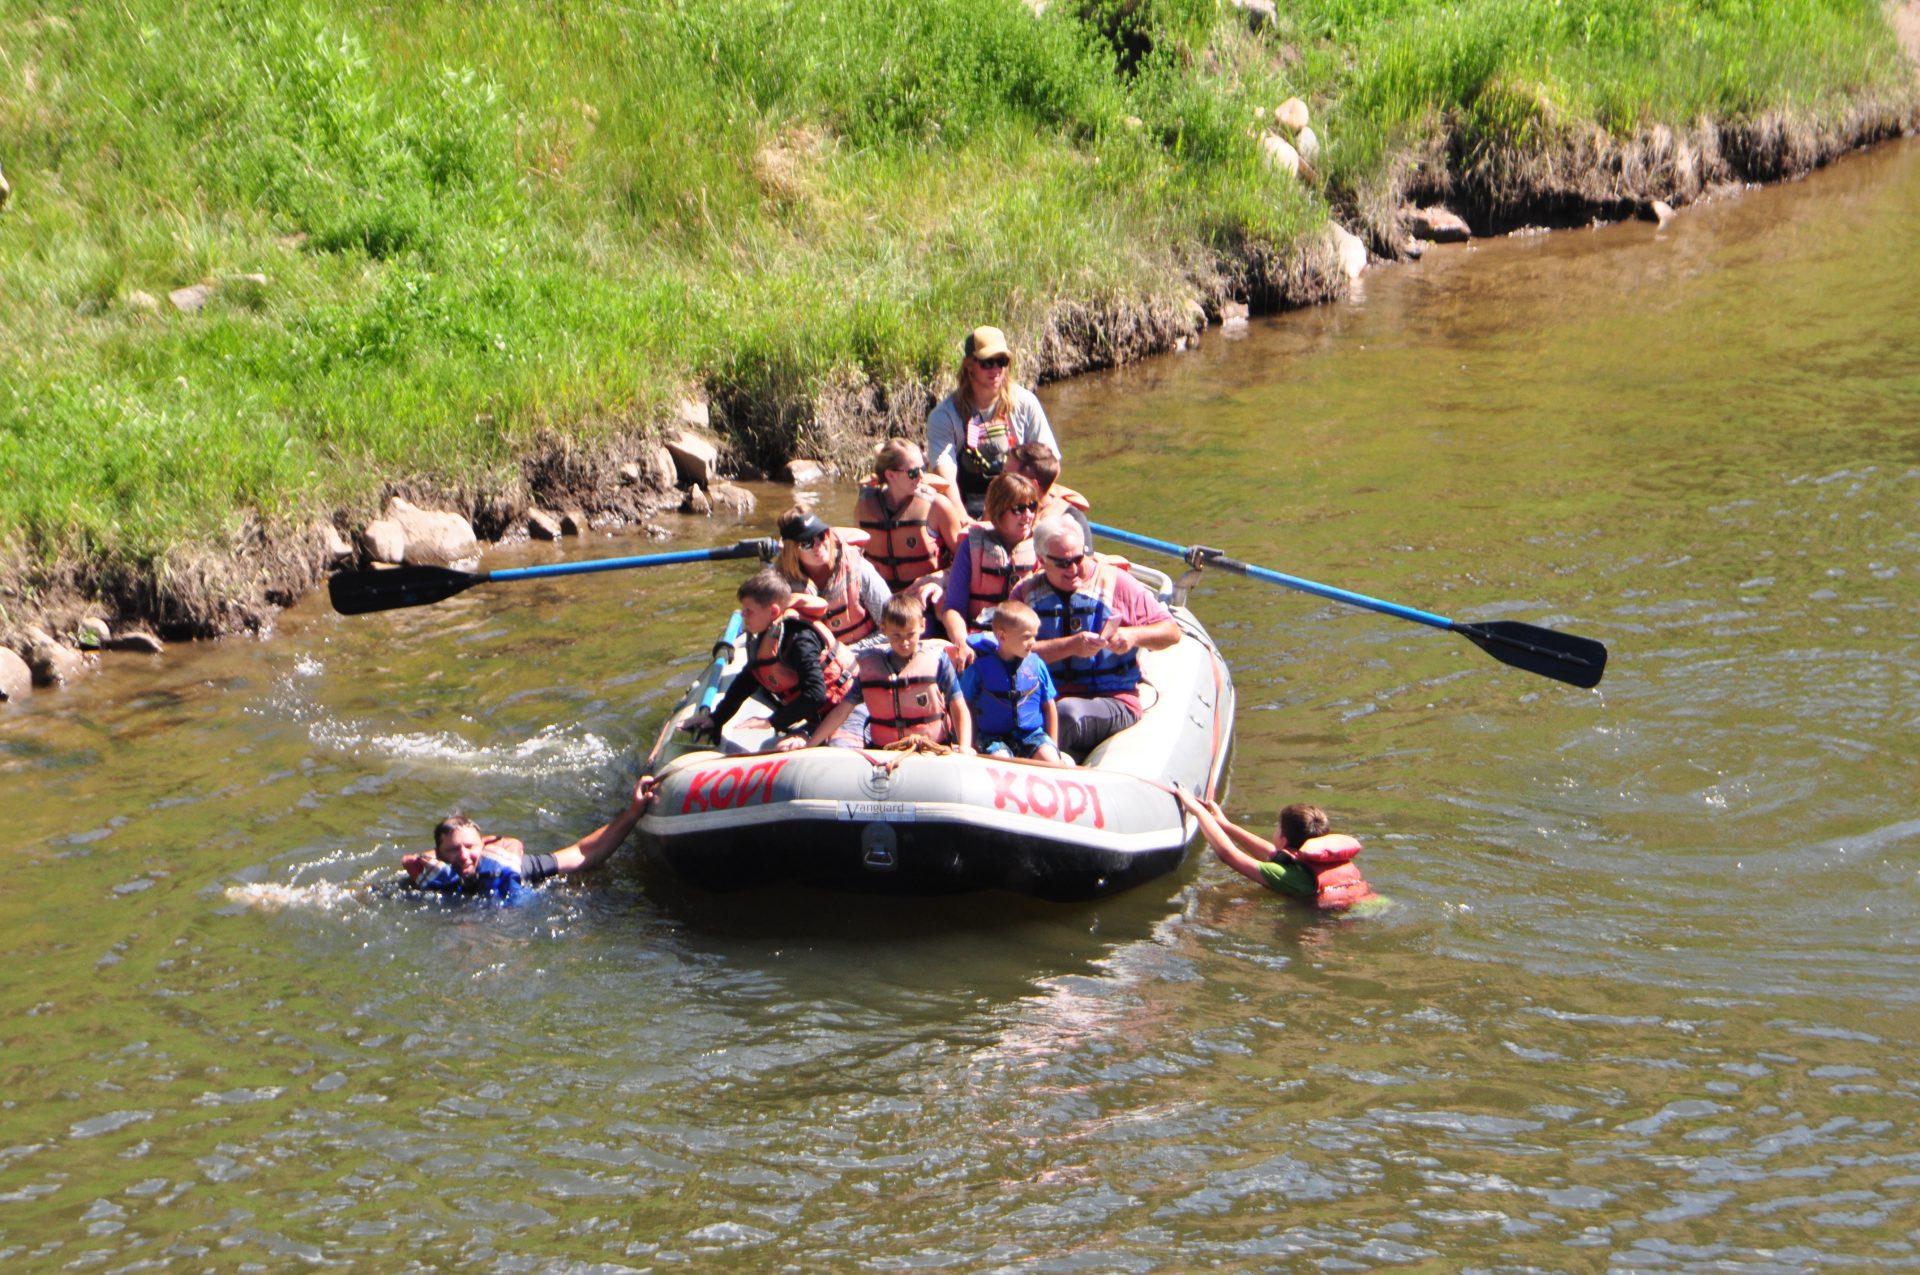 Adventure awaits you with Colorado river rafting and the best rental equipment you can find